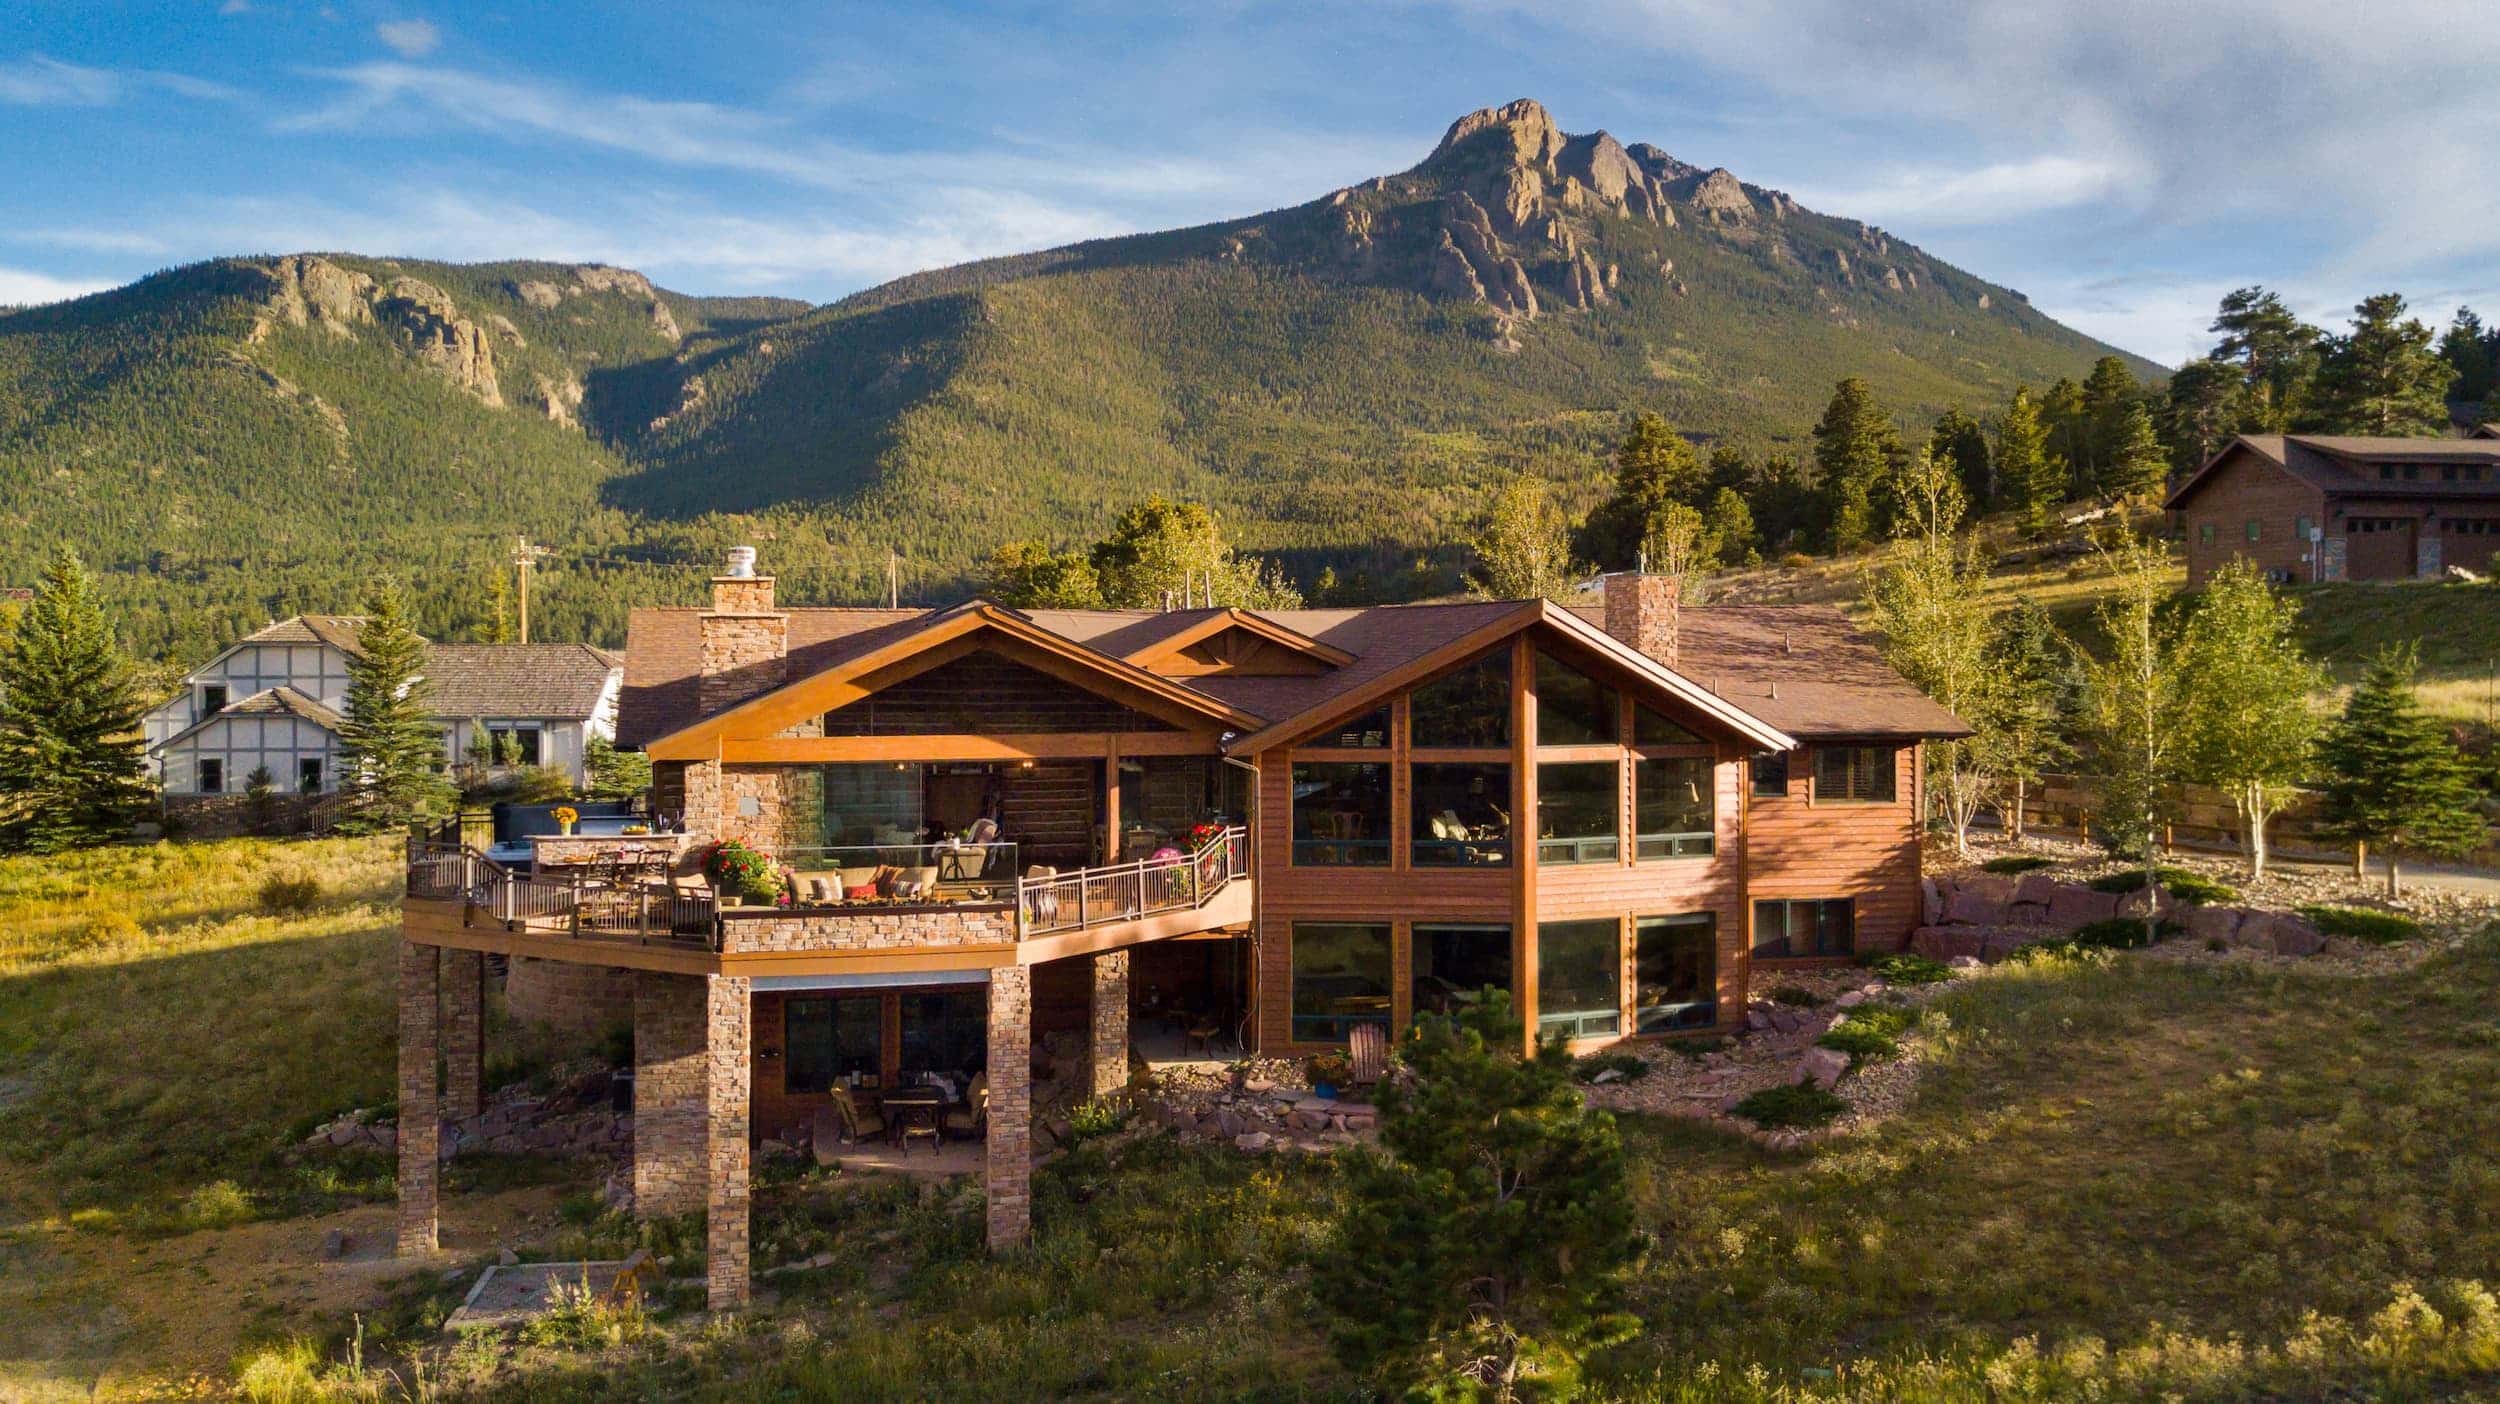 An aerial view of a home with mountains in the background.